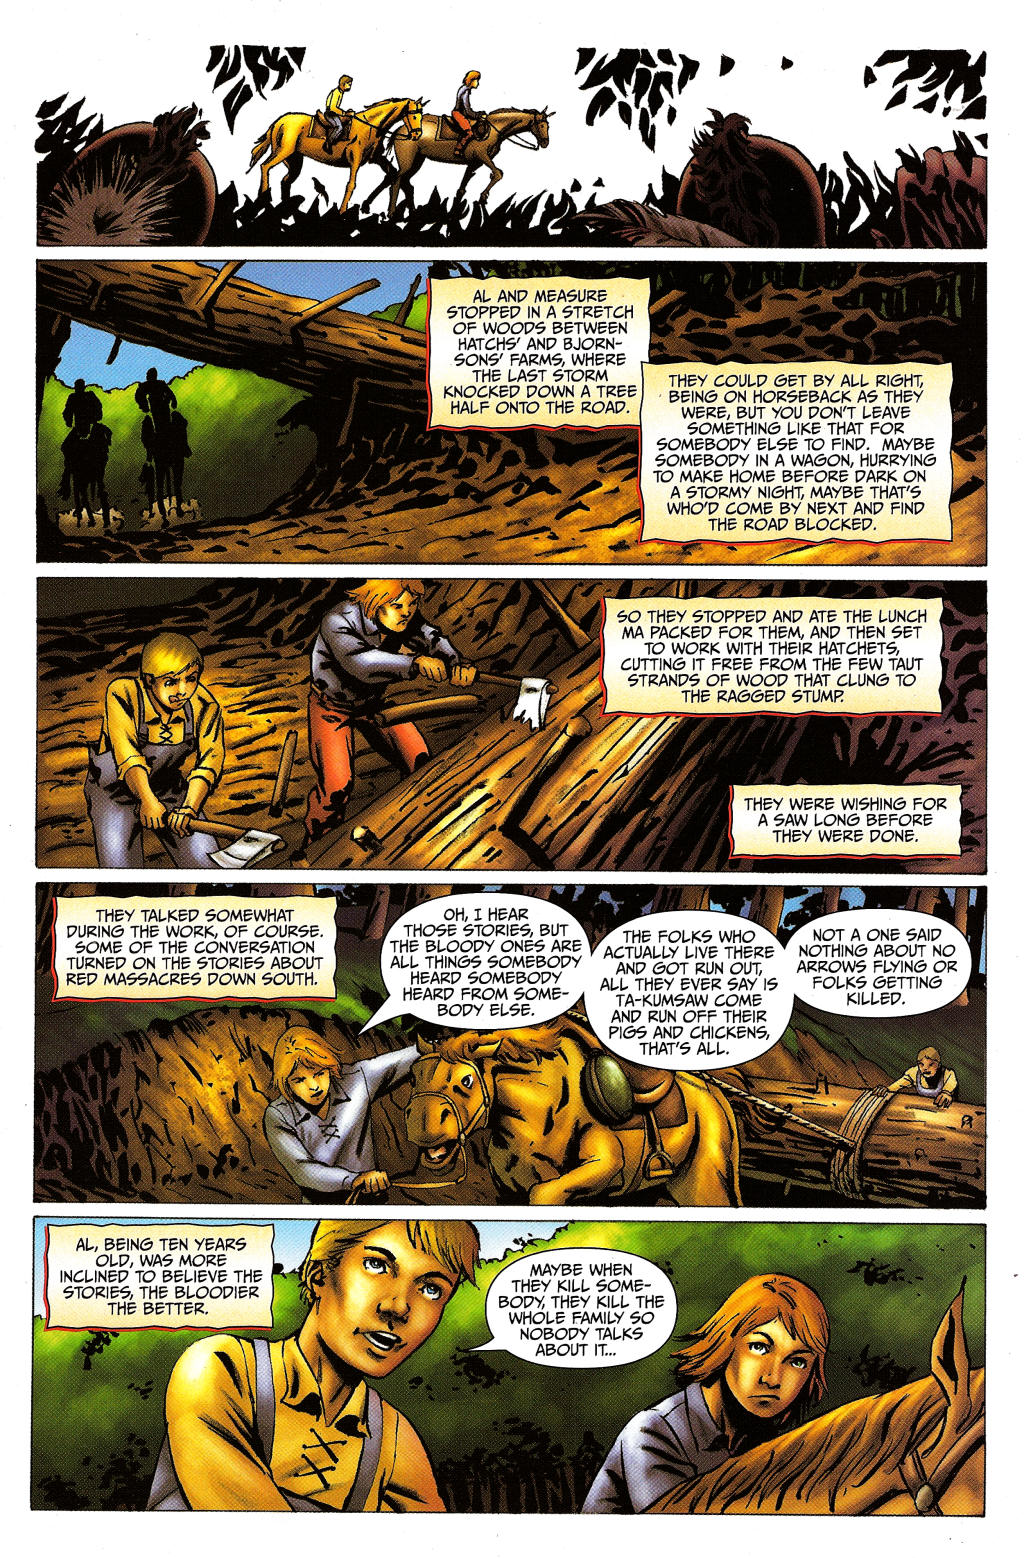 Red Prophet: The Tales of Alvin Maker issue 4 - Page 23